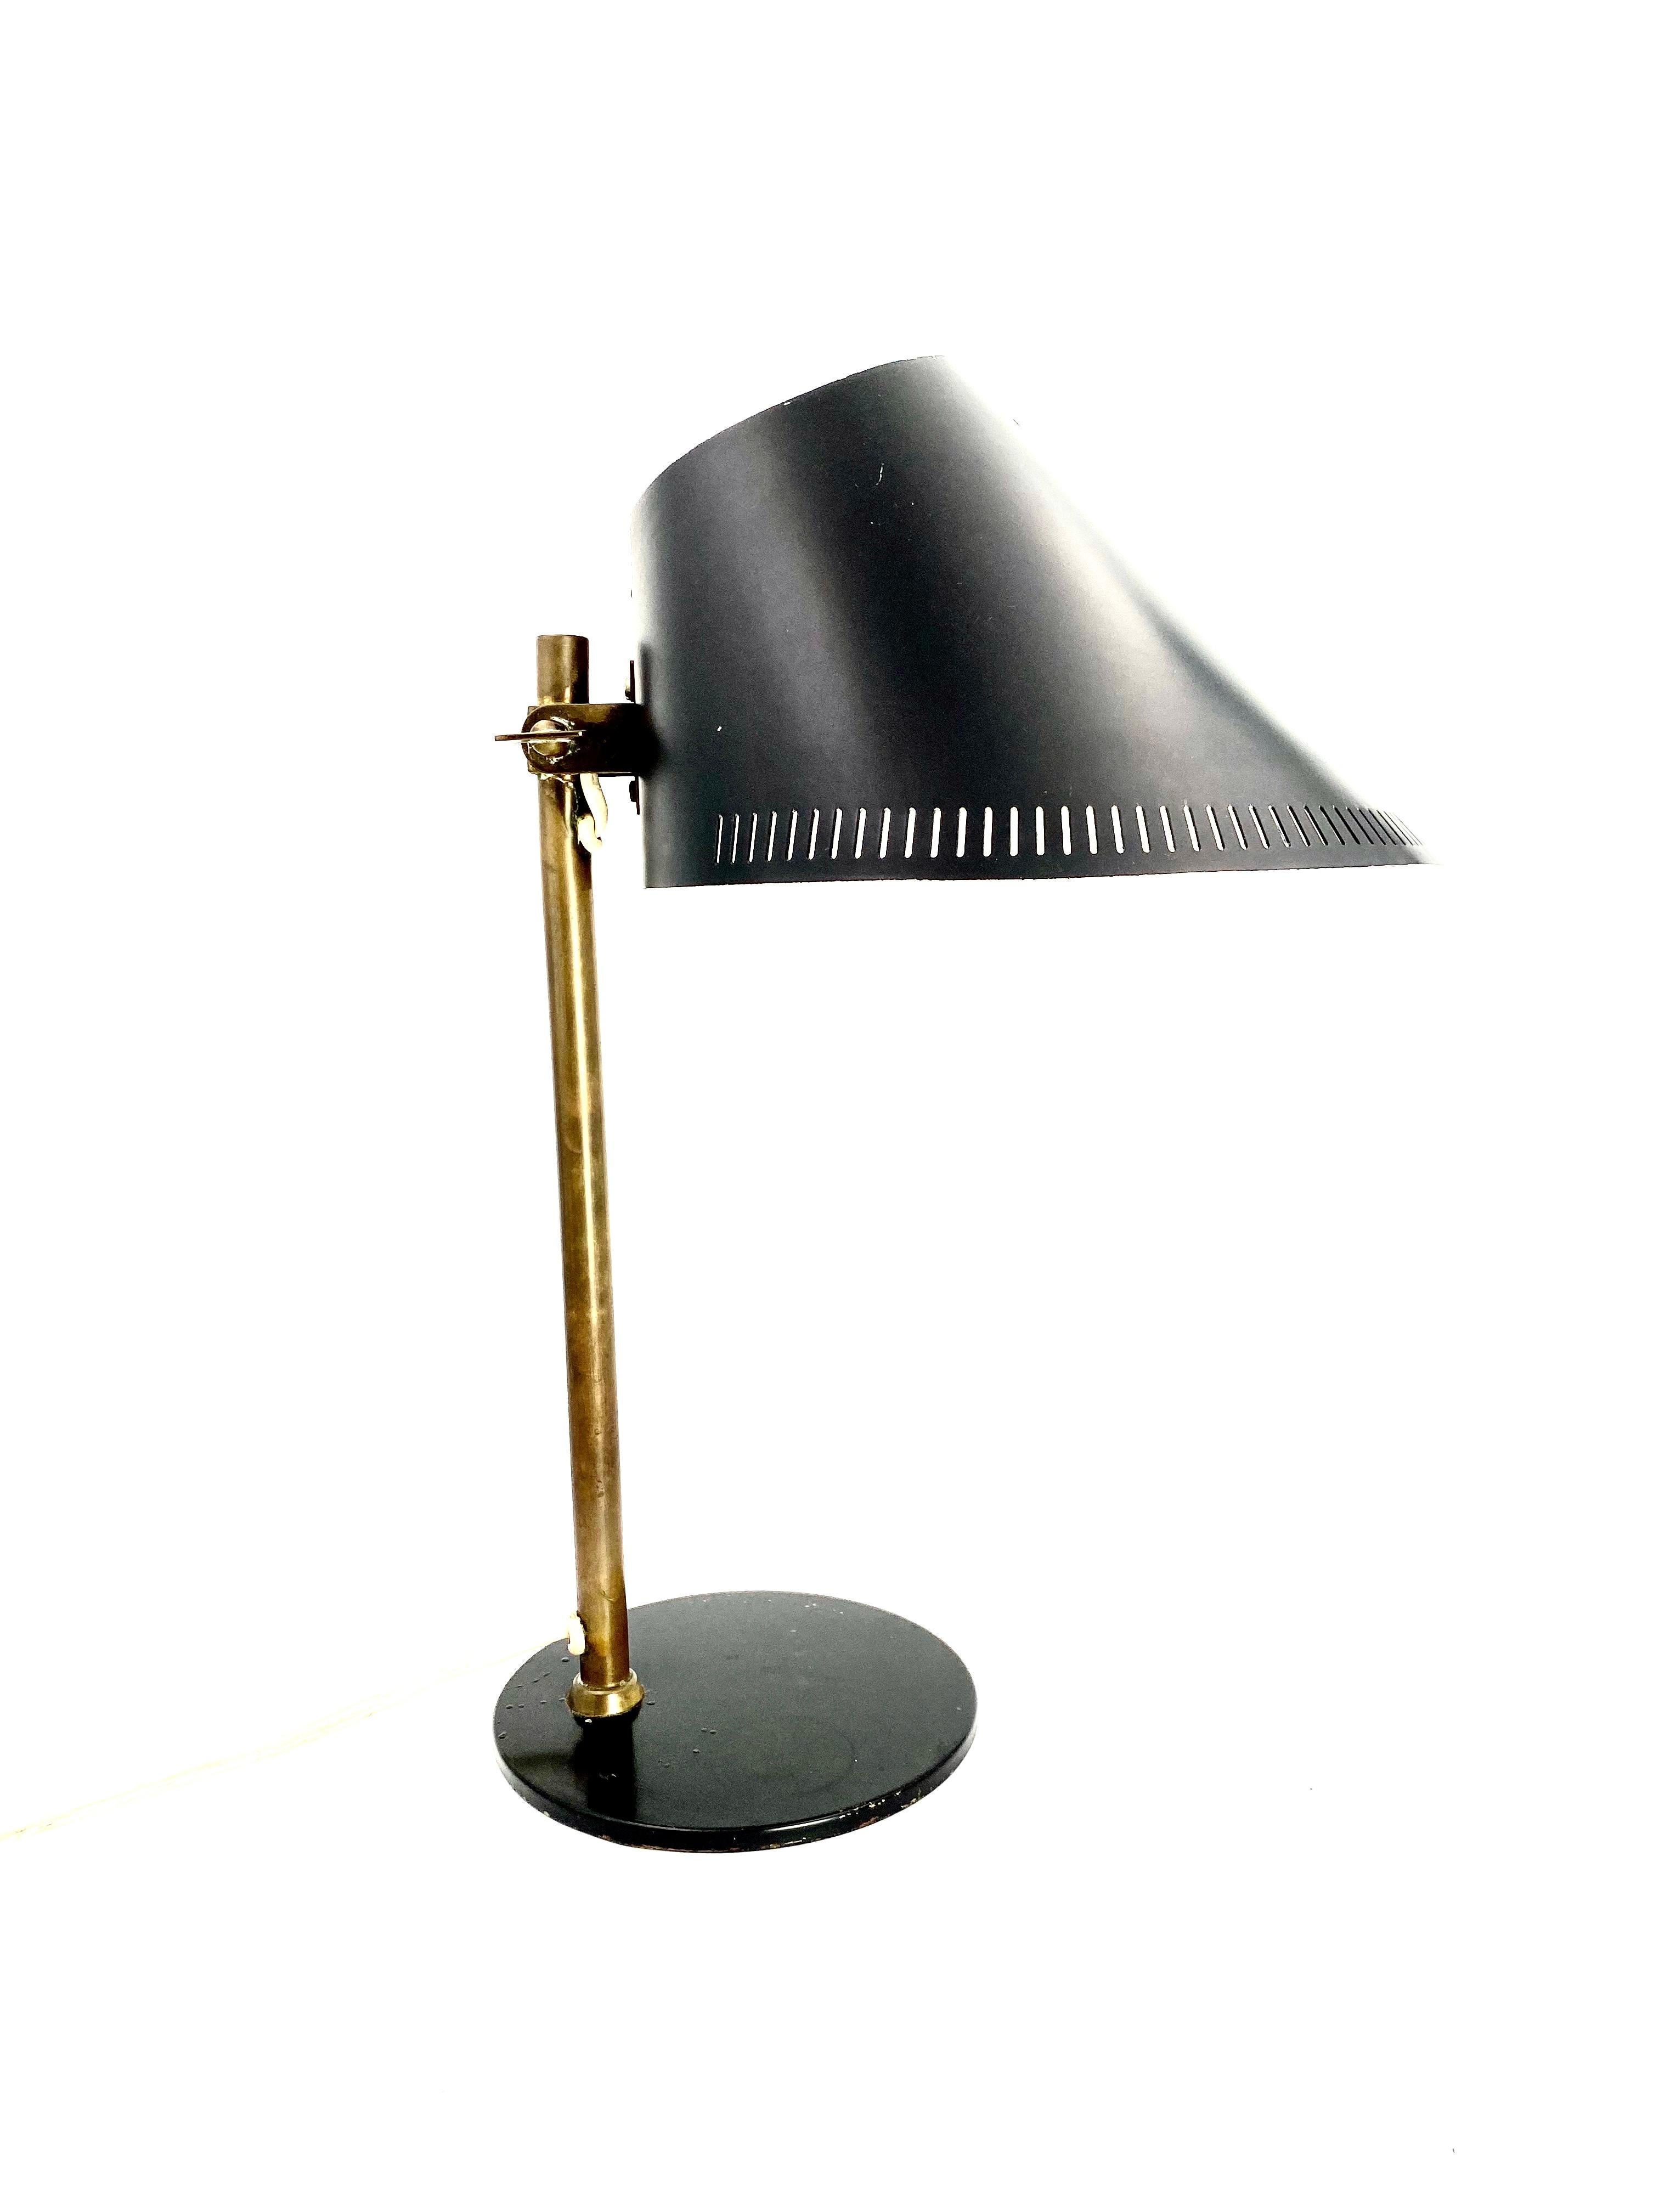 Aluminum Paavo Tynell Rare Table Lamp Mod. 9227, by Taito E Idman, Finland, 1958 For Sale